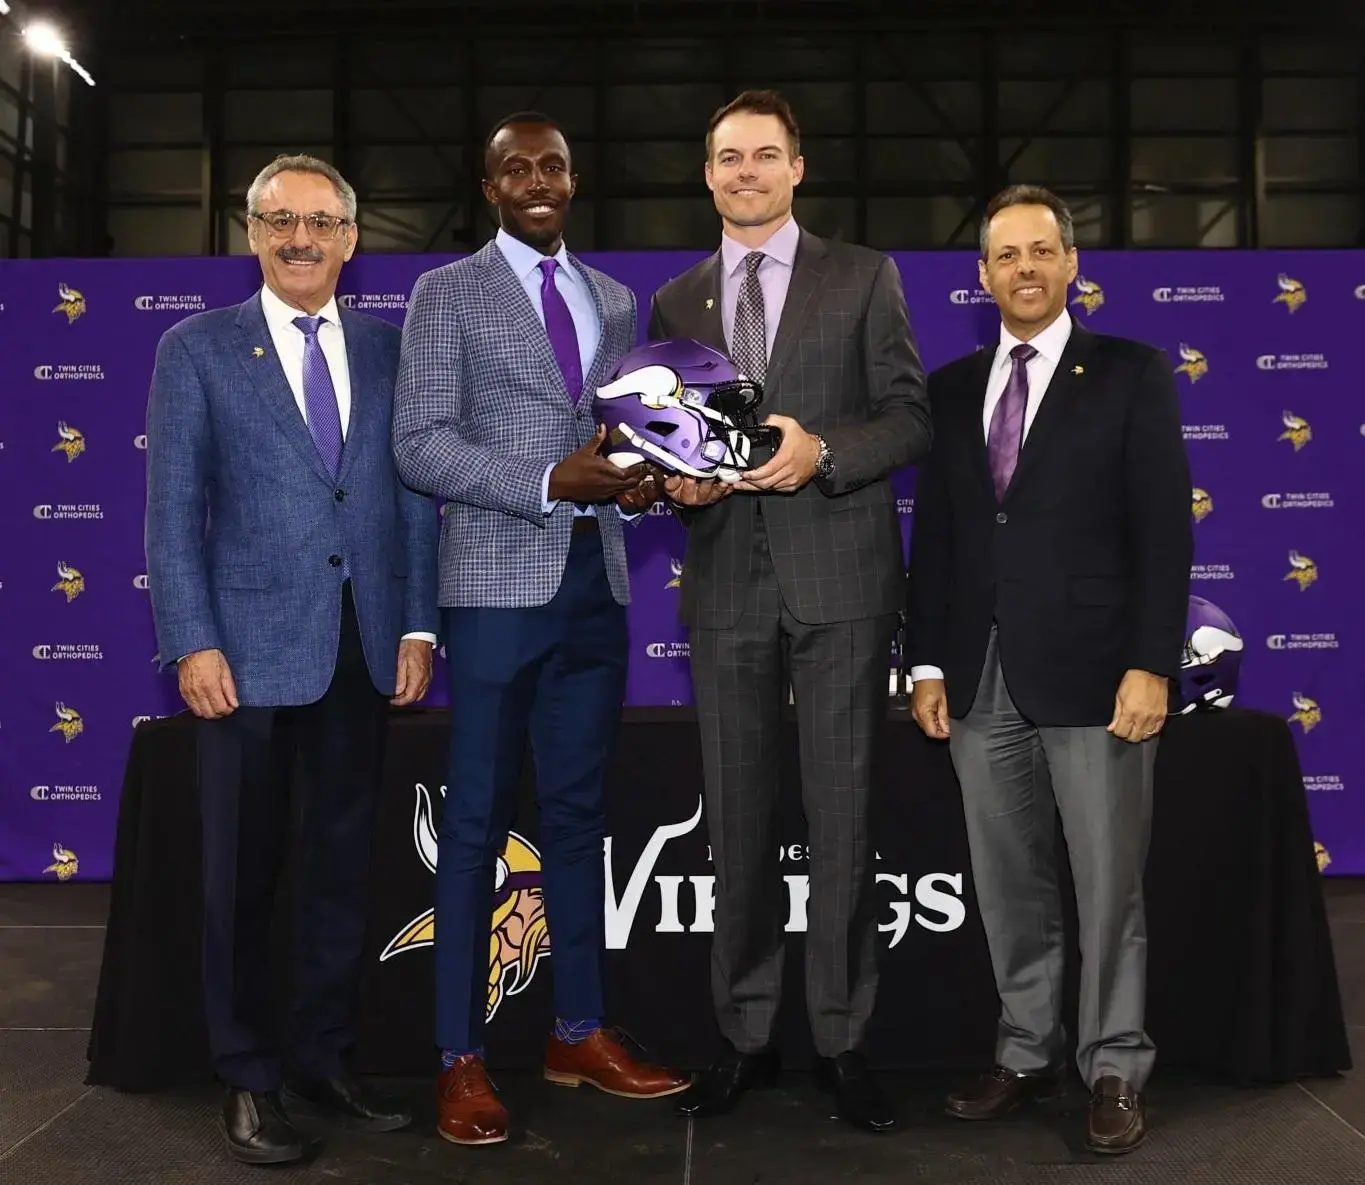 New Minnesota Vikings head coach Kevin O'Connell